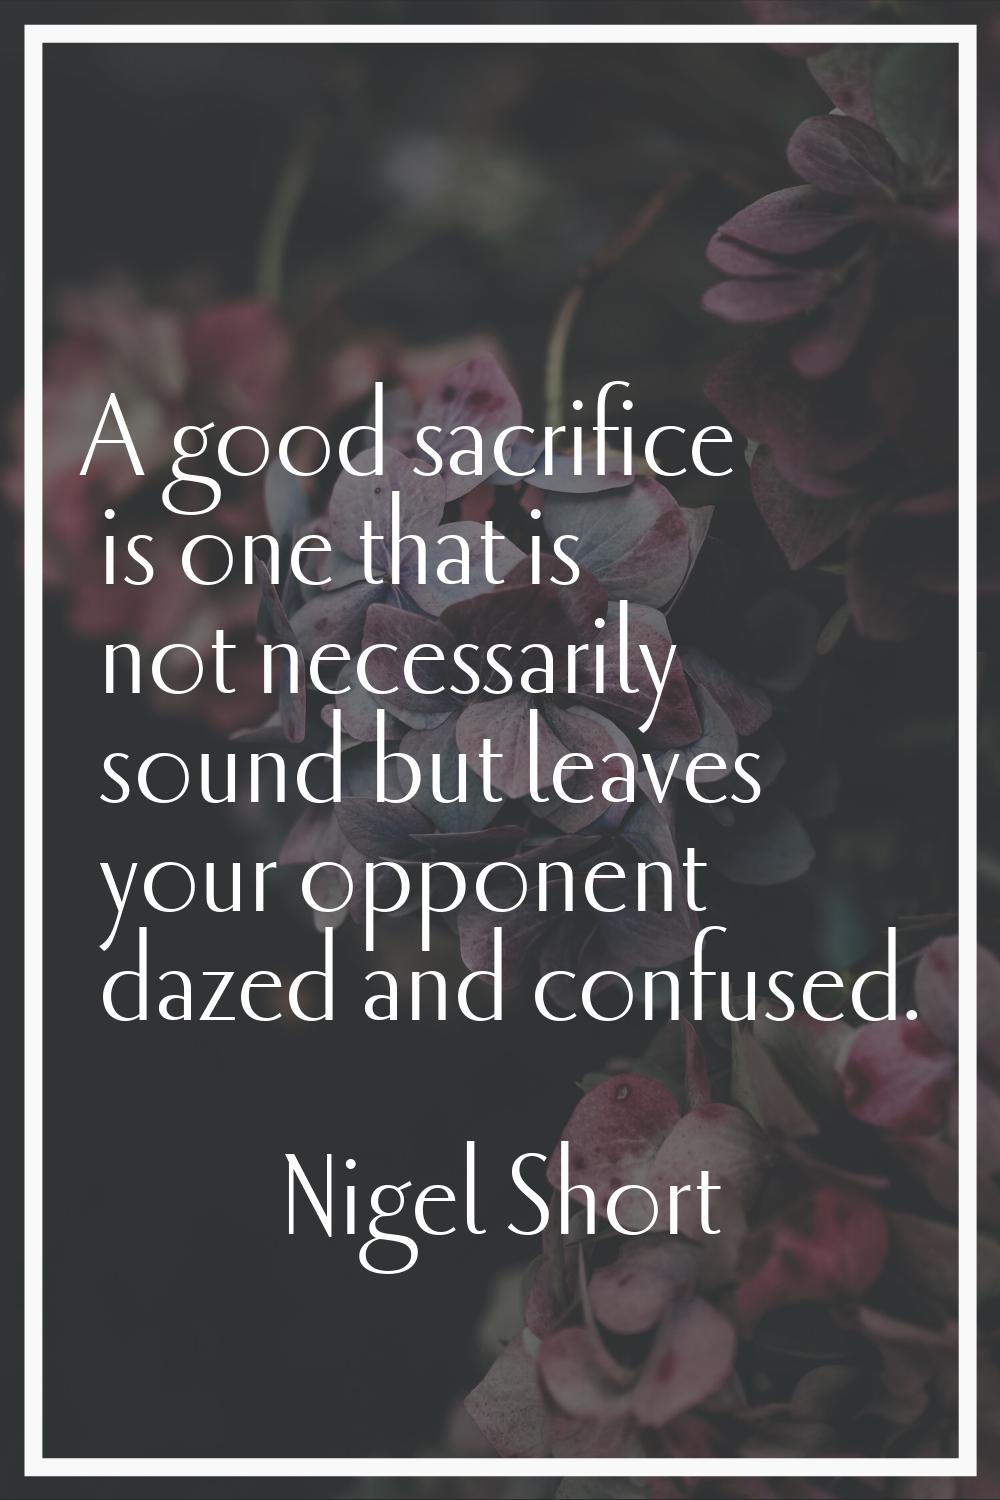 A good sacrifice is one that is not necessarily sound but leaves your opponent dazed and confused.